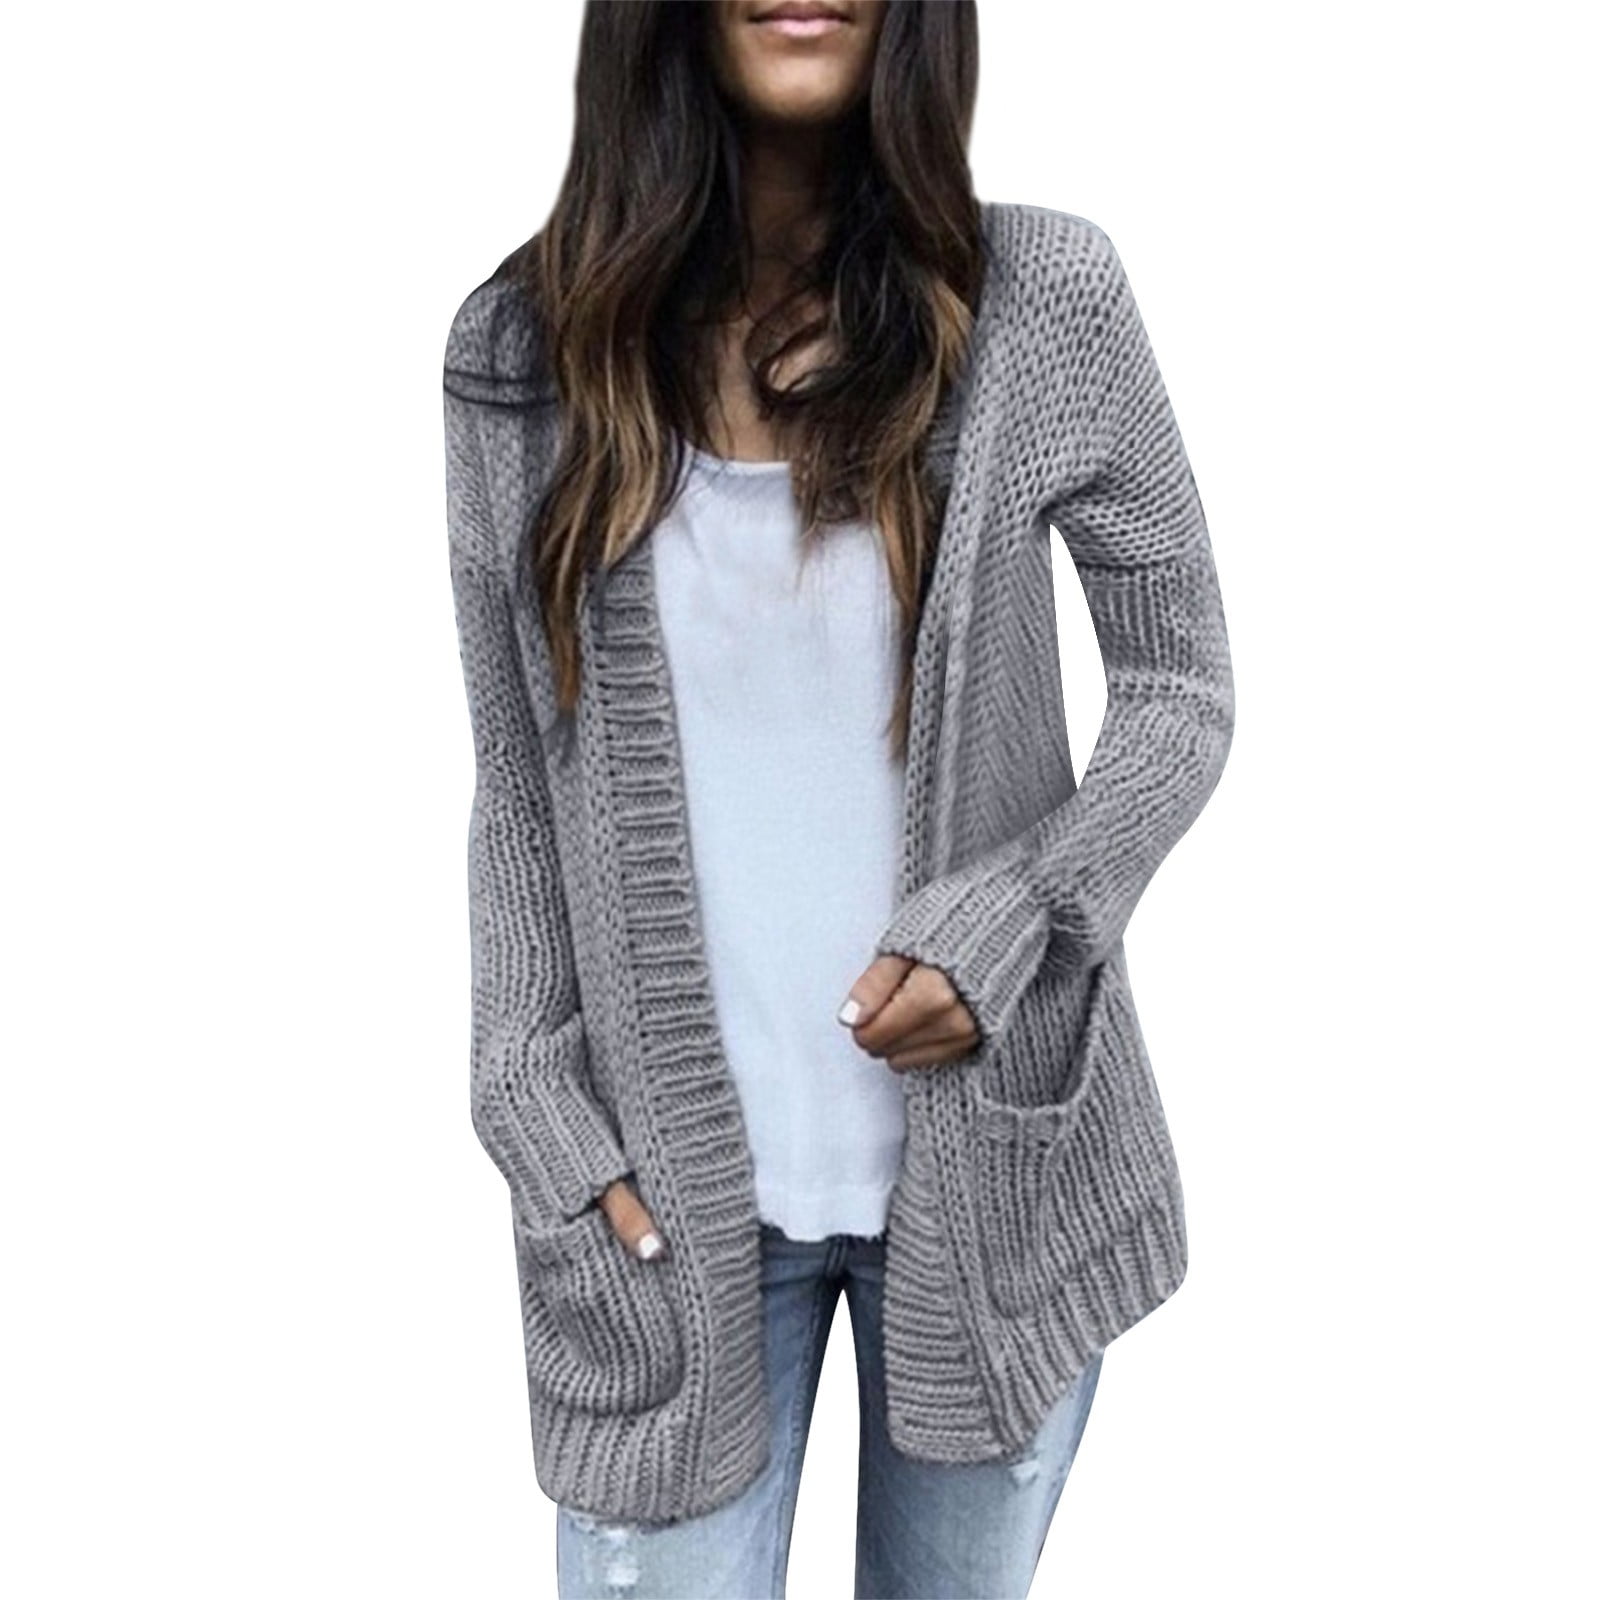 NKOOGH Try Before You Buy Womens Sweaters Misses Cardigan Sweater